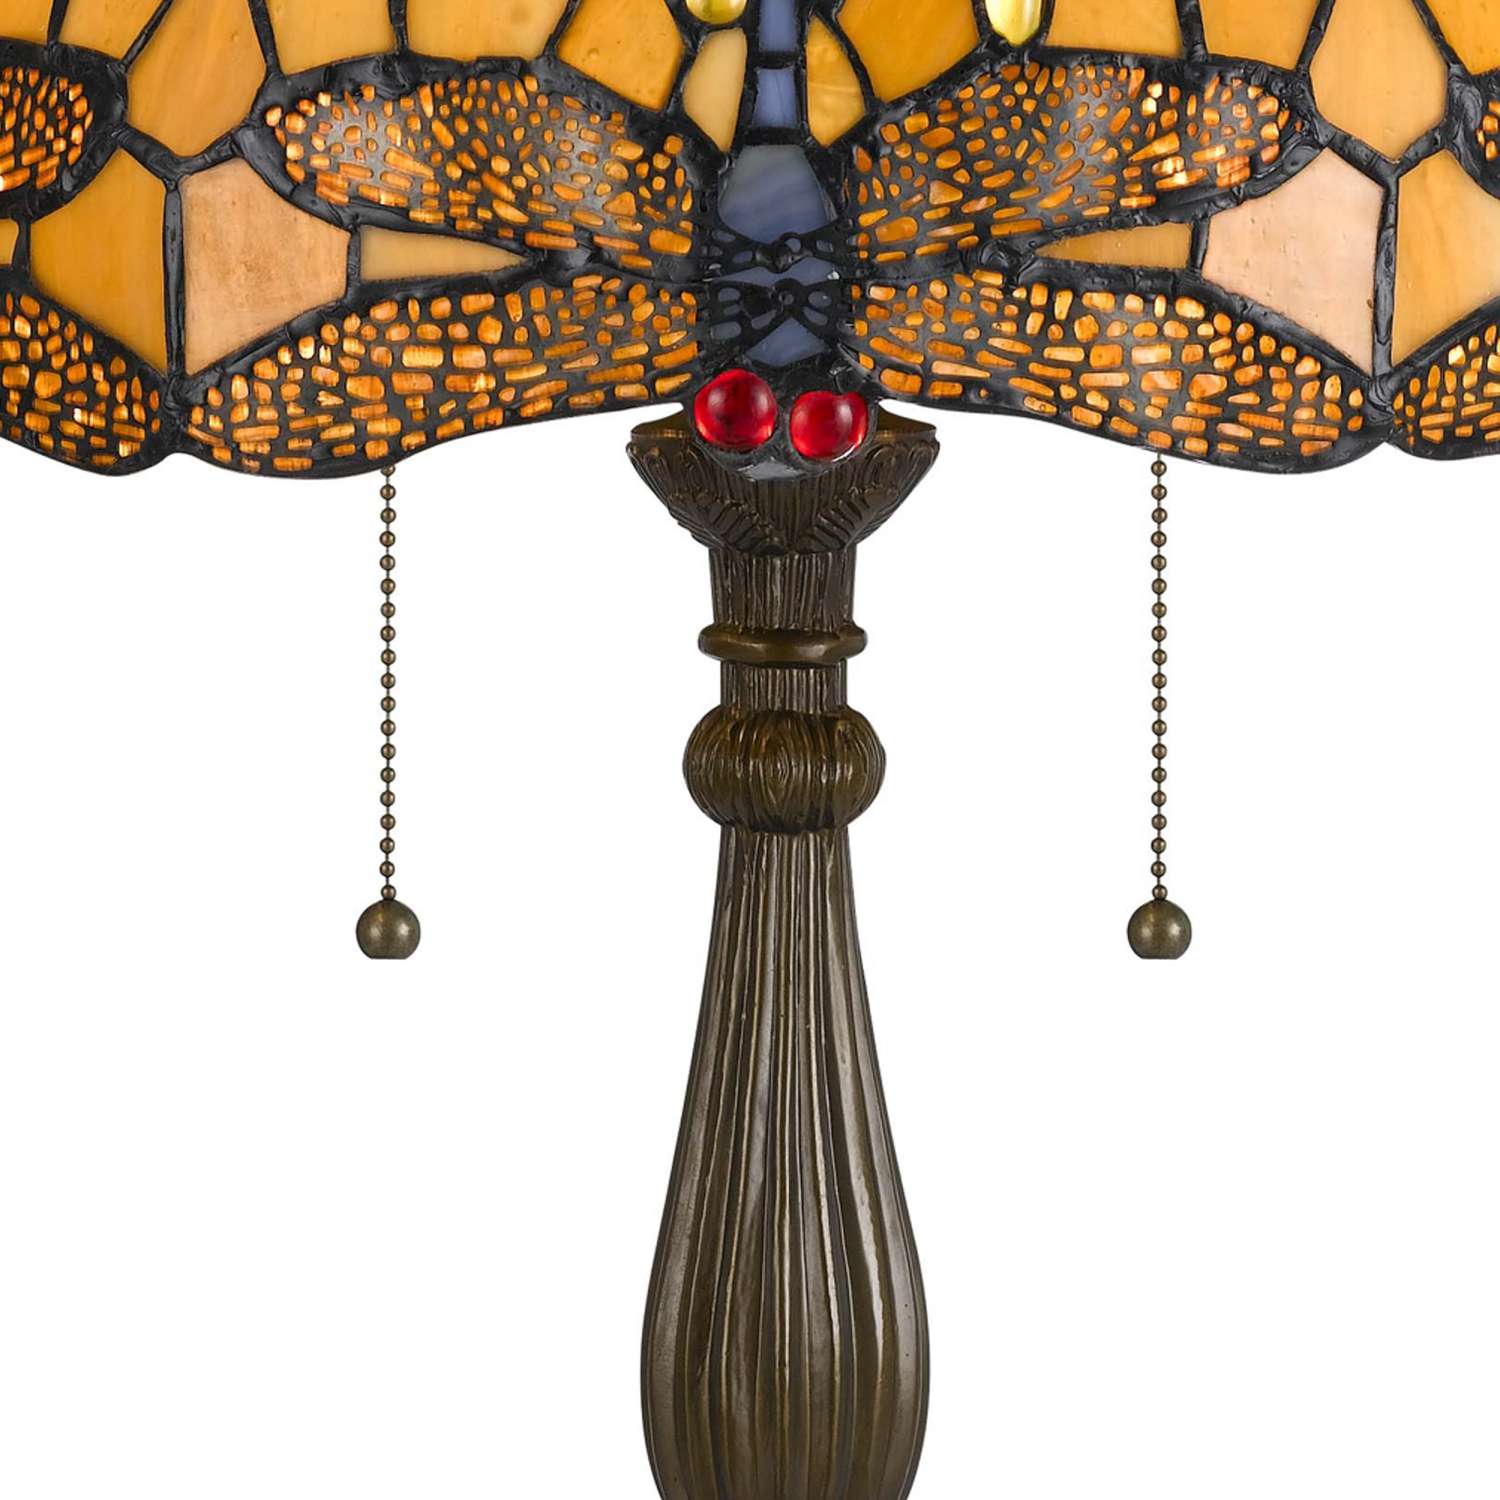 2 Bulb Tiffany Table Lamp With Dragonfly Design Shade, Multicolor By Benzara